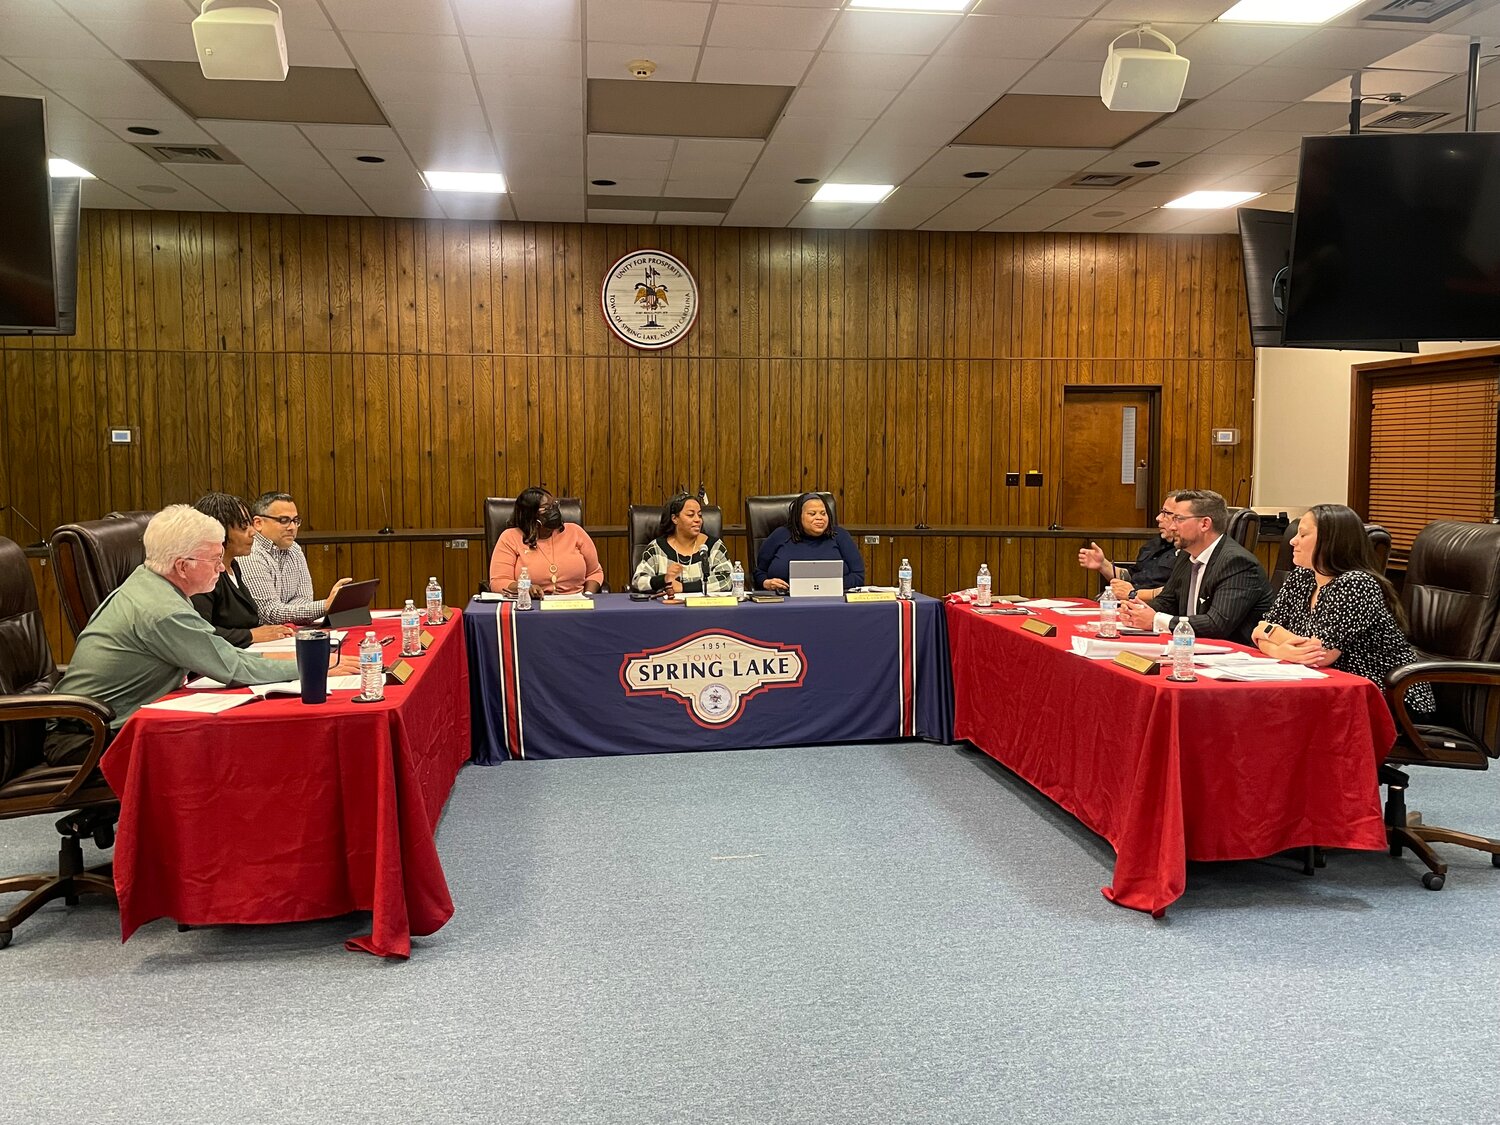 Members of the Spring Lake Board of Aldermen at Monday's work session. The board decided at the Nov. 27 meeting to move forward by consensus to extend terms of office to four years and change board titles to "commissioners."